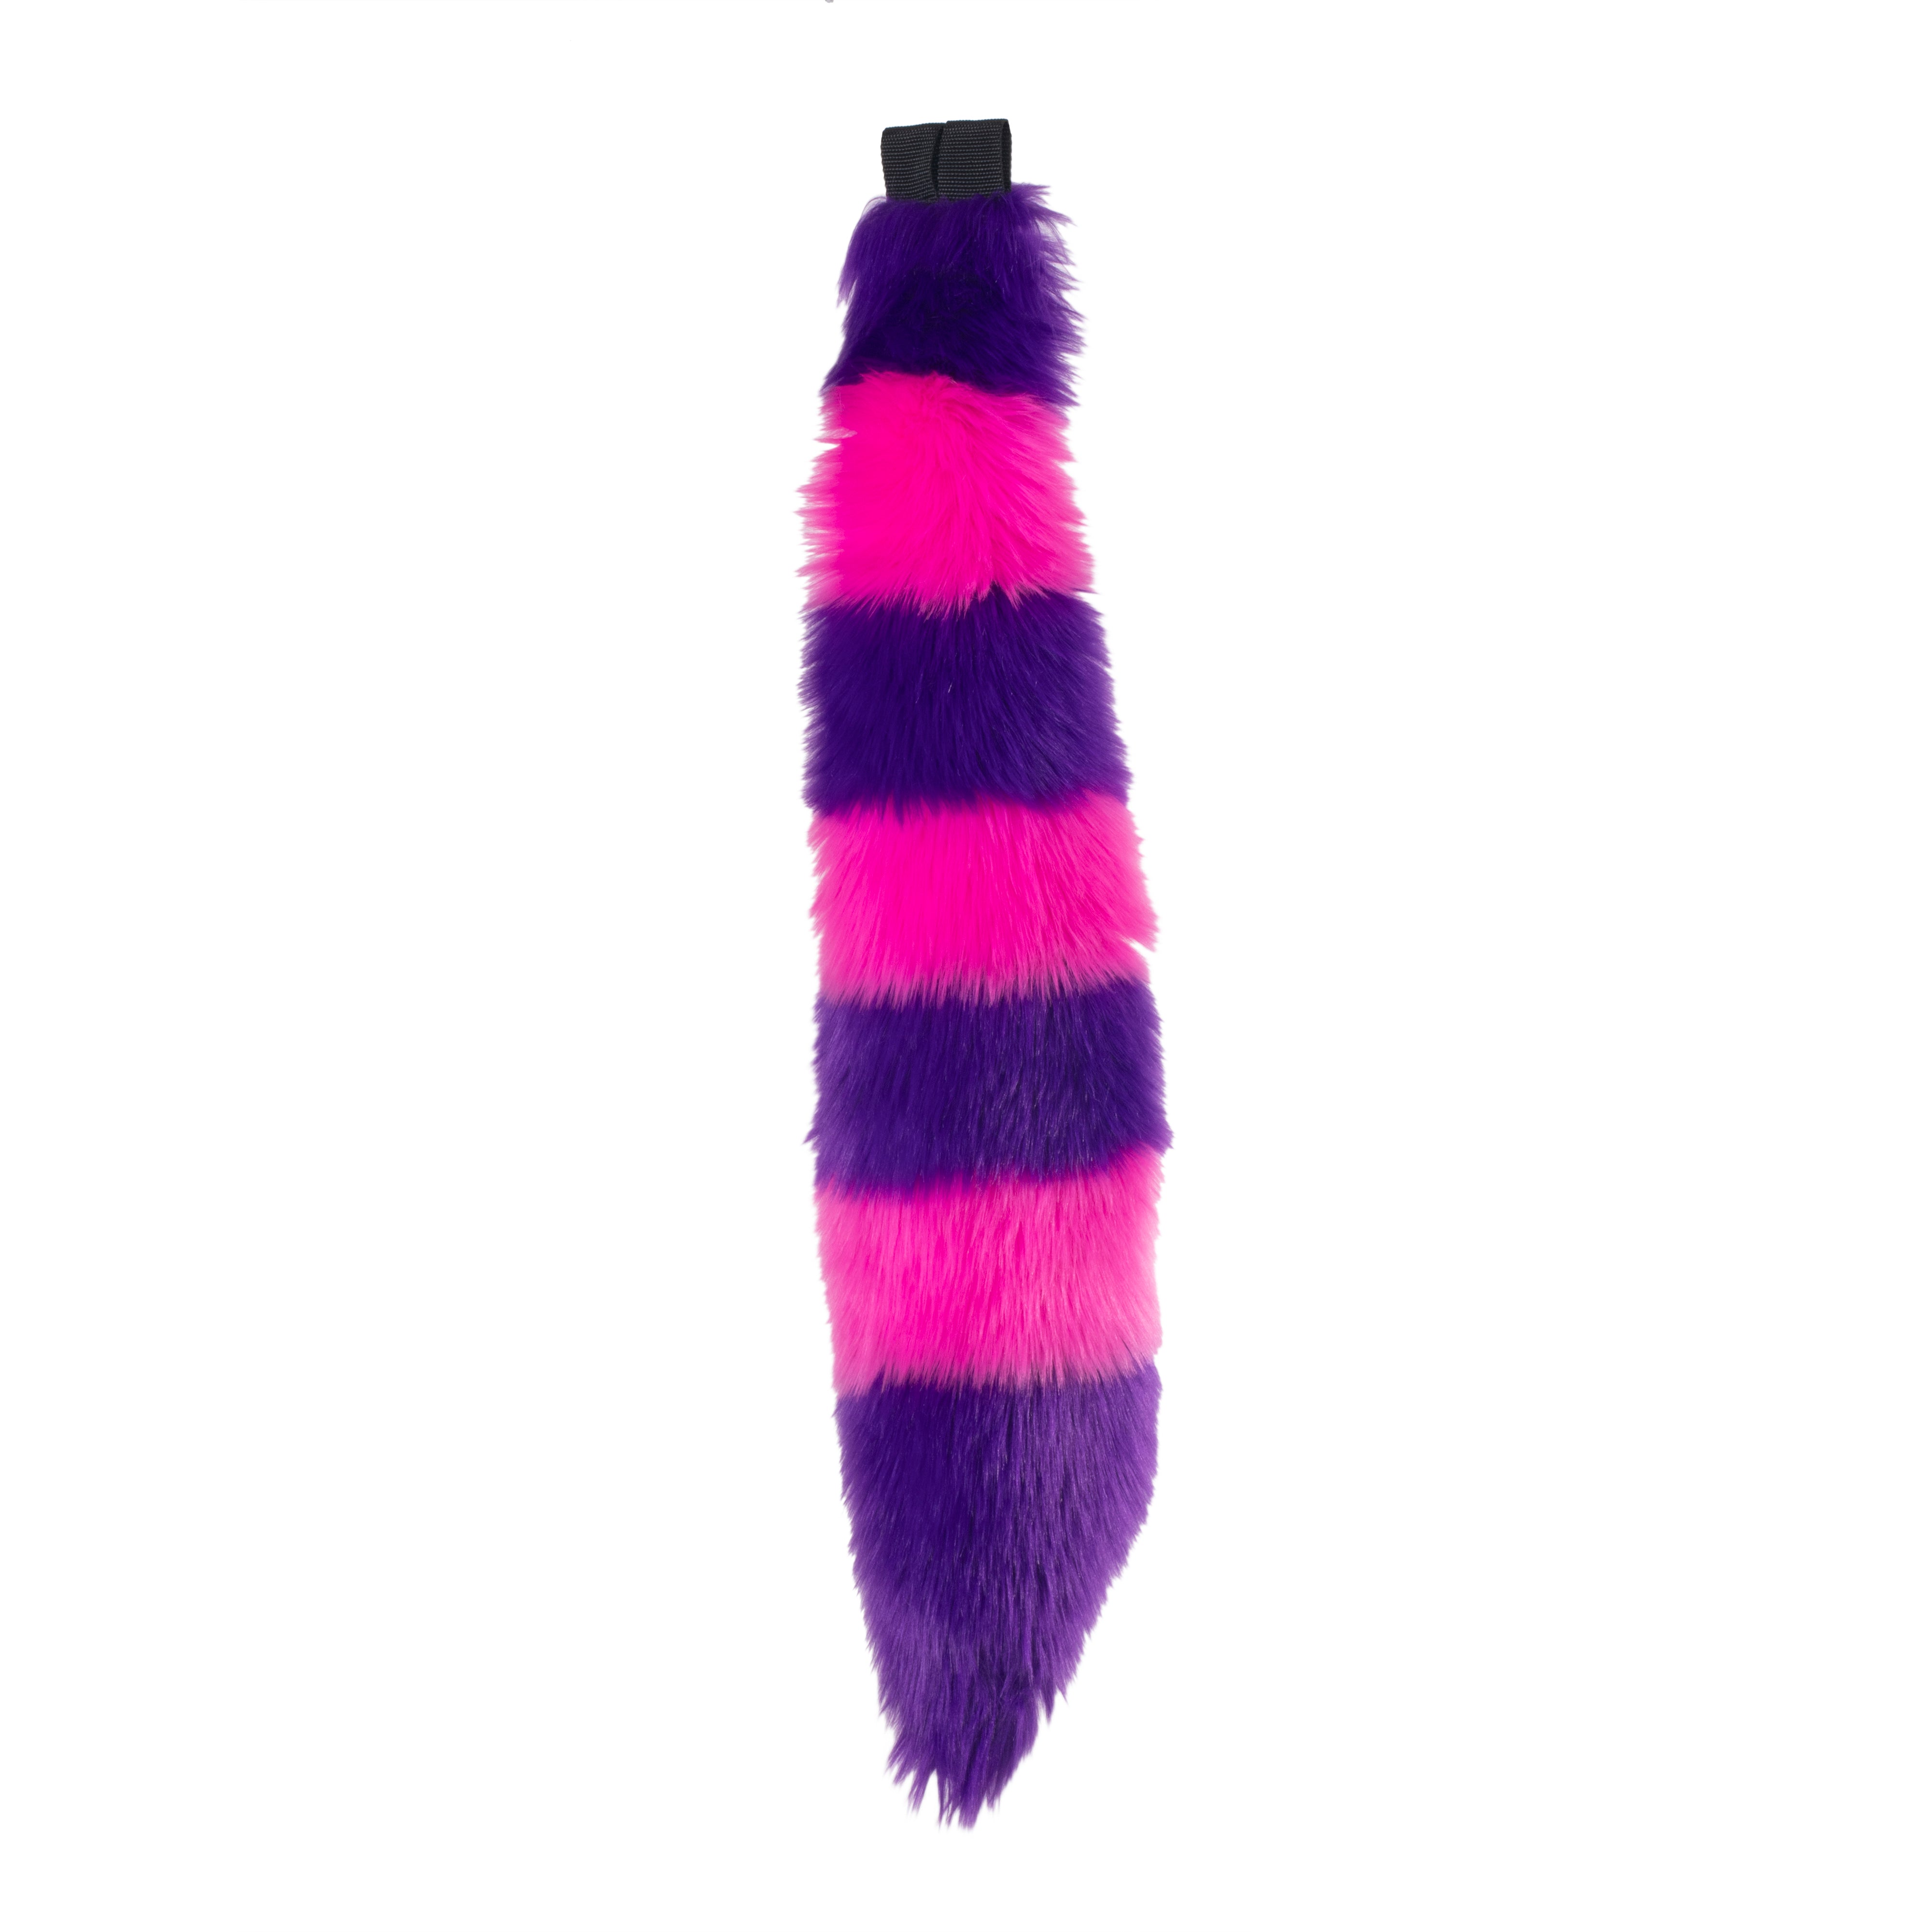 Cheshire Full Fox Tail - Pawstar Pawstar Tails canine, cosplay, costume, fox, furry, ship-15, ship-15day, tail